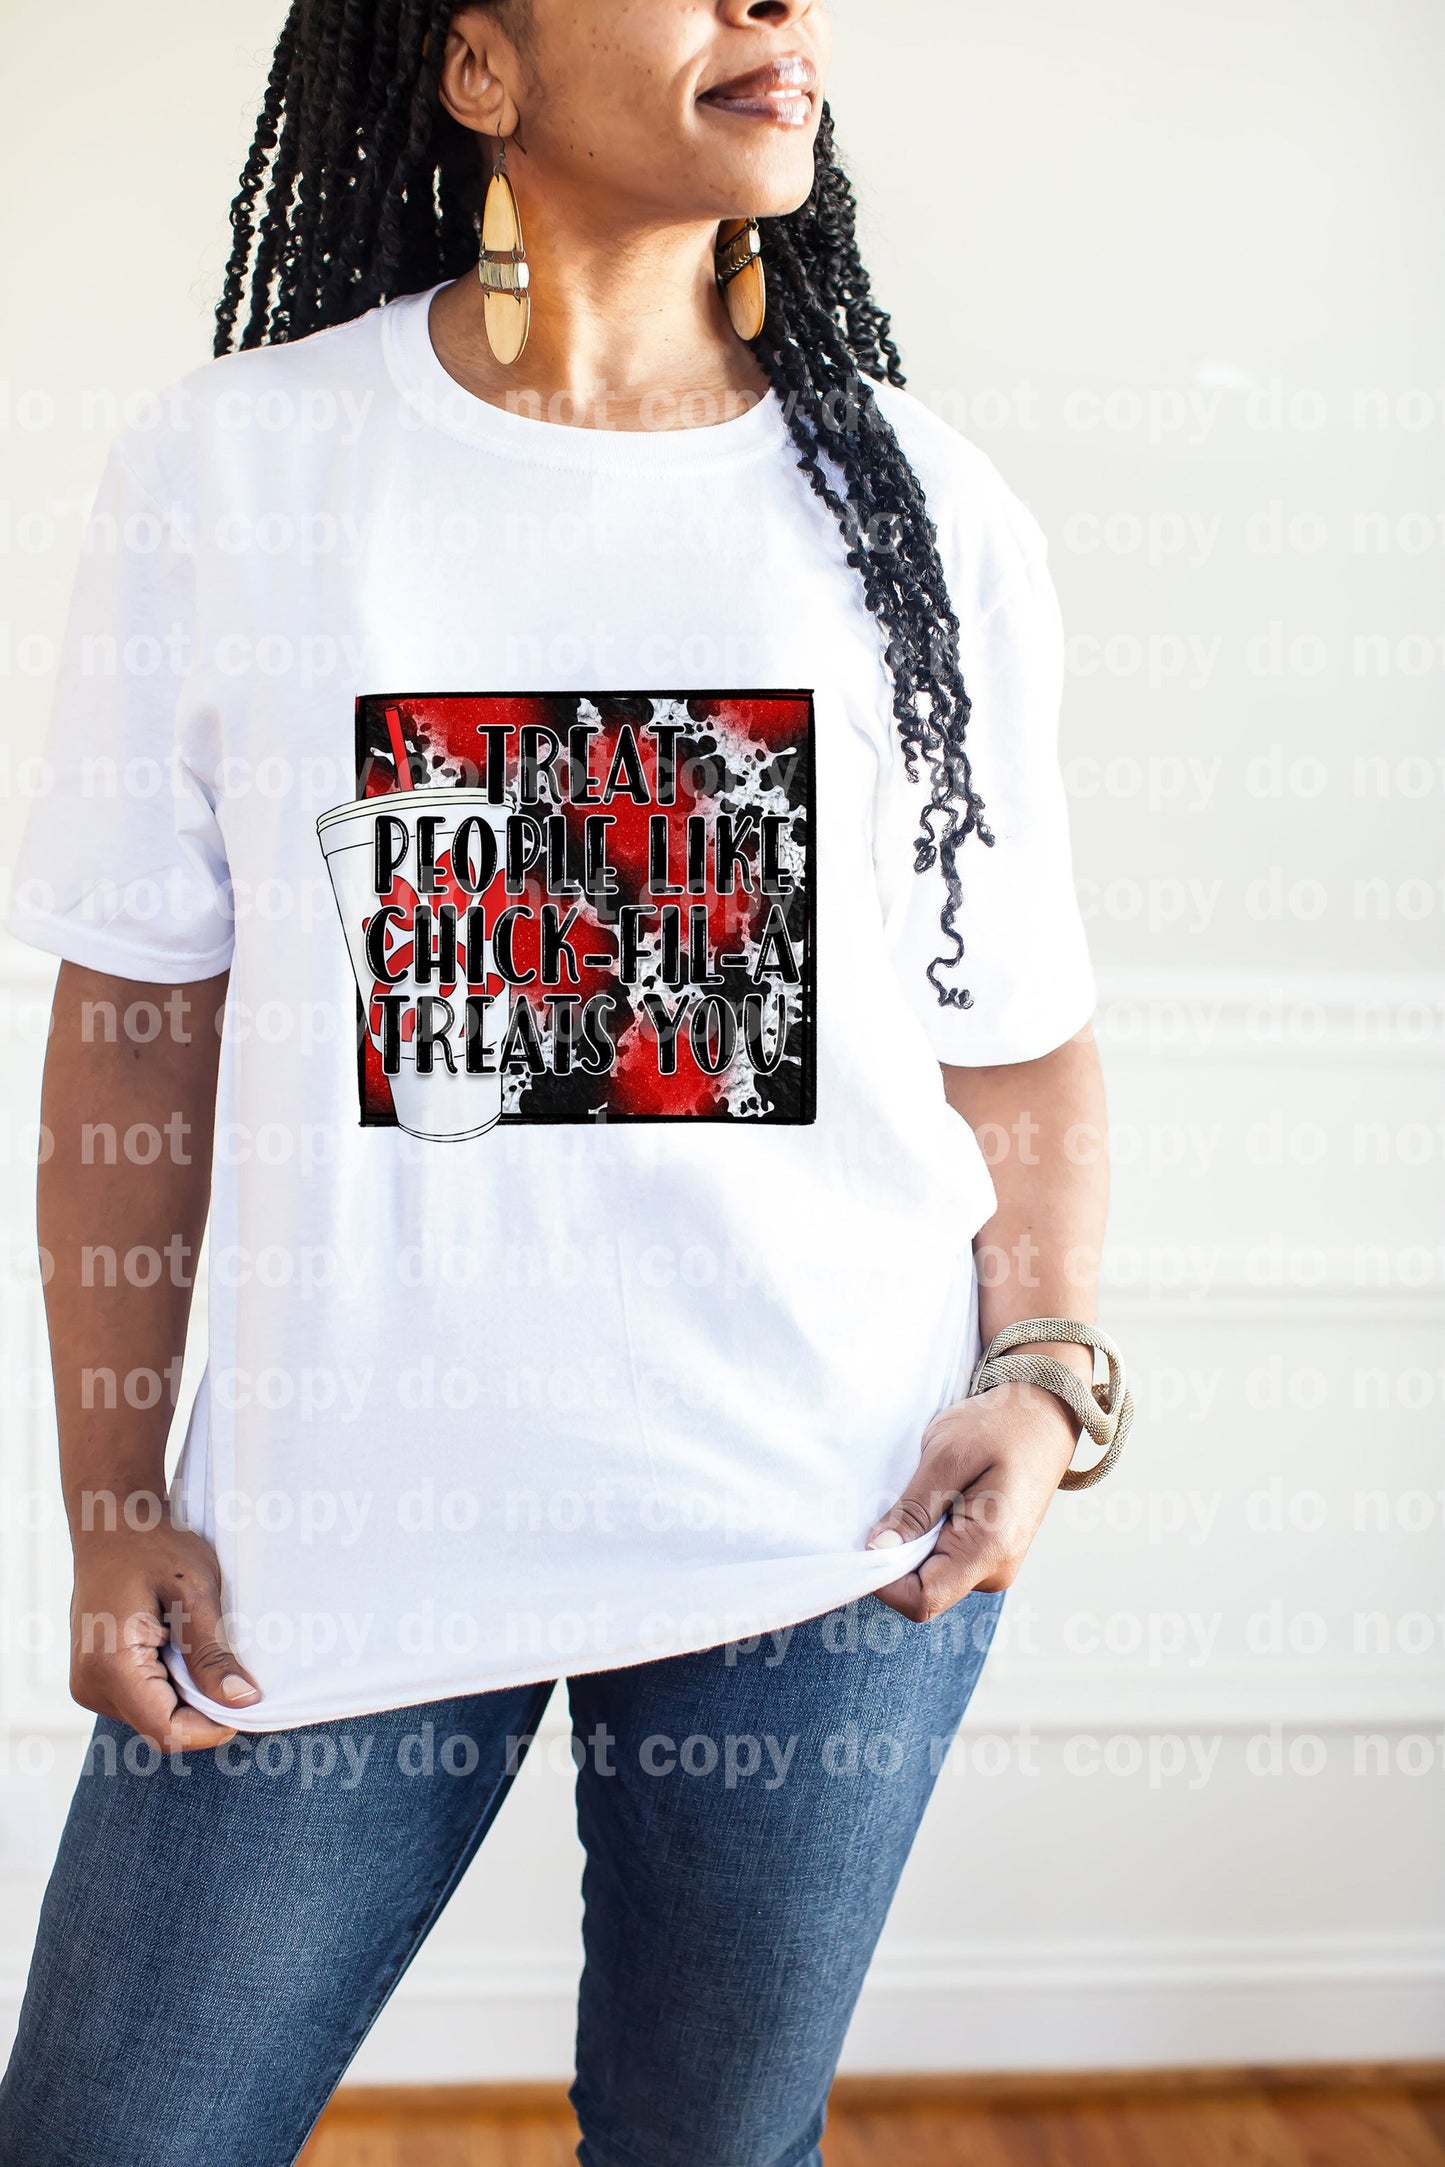 Treat People Like A Chic-Fil-A Treats You Dream Print or Sublimation Print